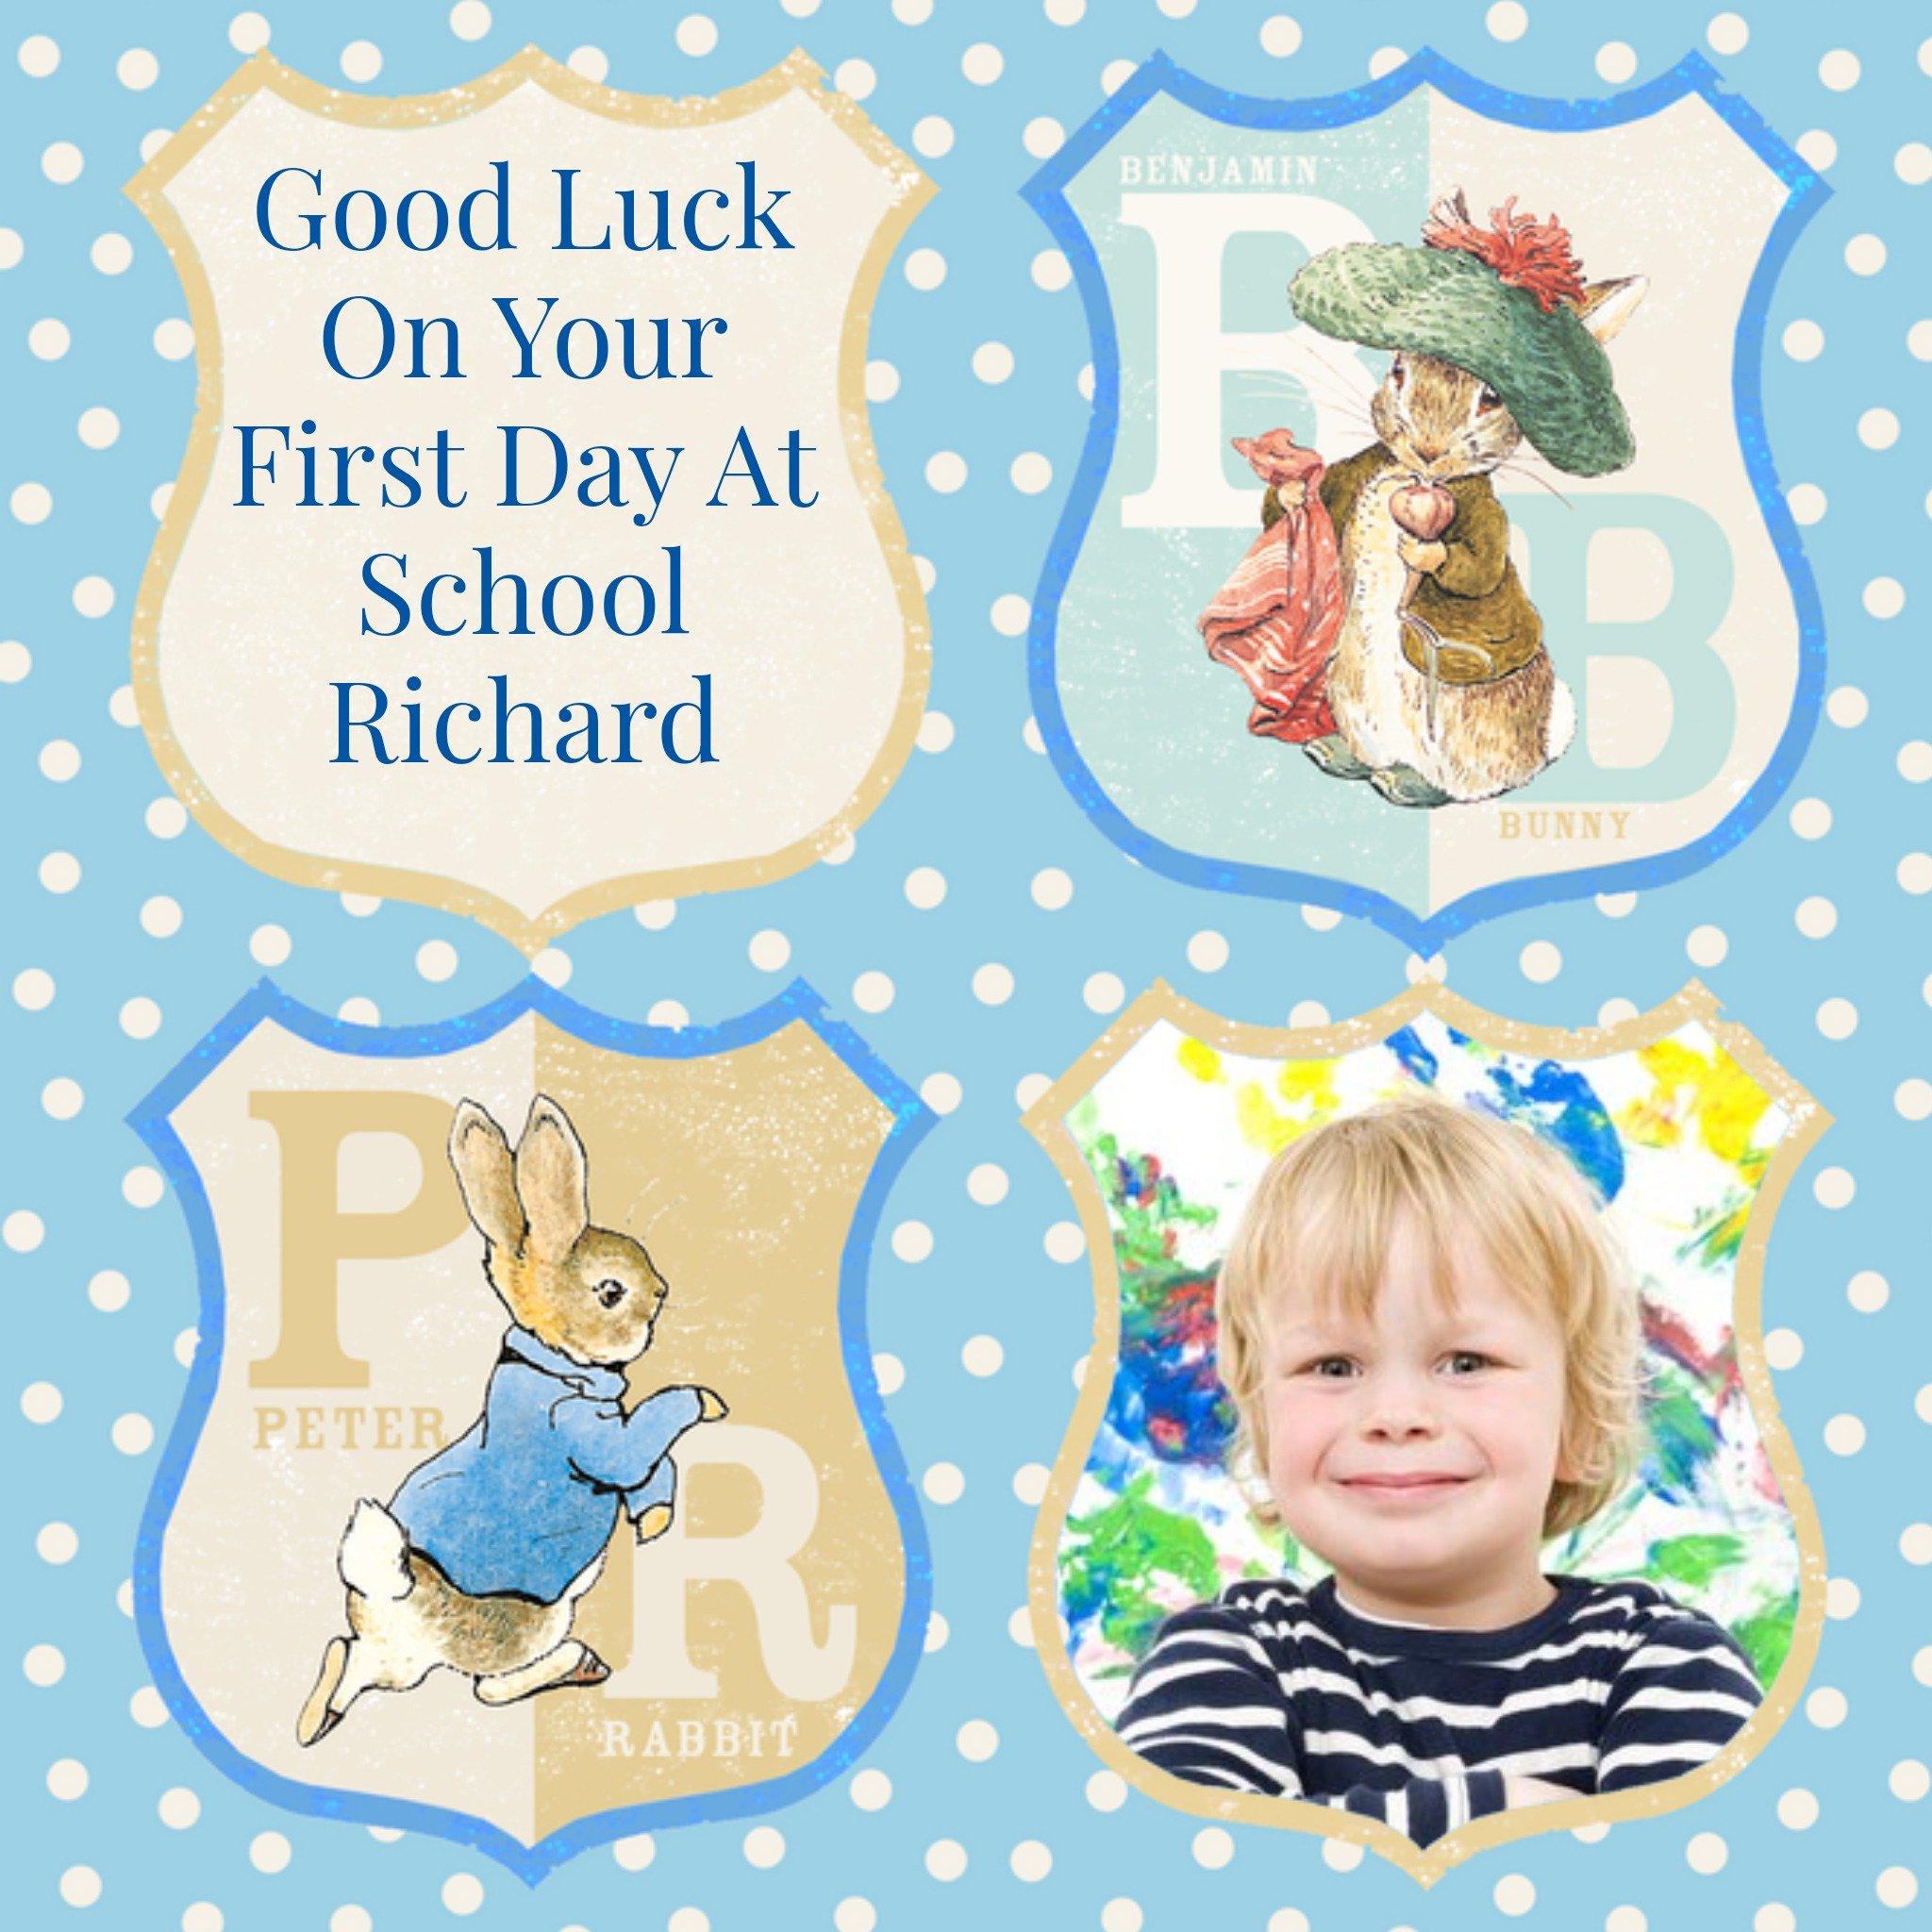 Beatrix Potter Peter Rabbit Personalised Photo Upload Good Luck On Your First Day At School Card, Sq